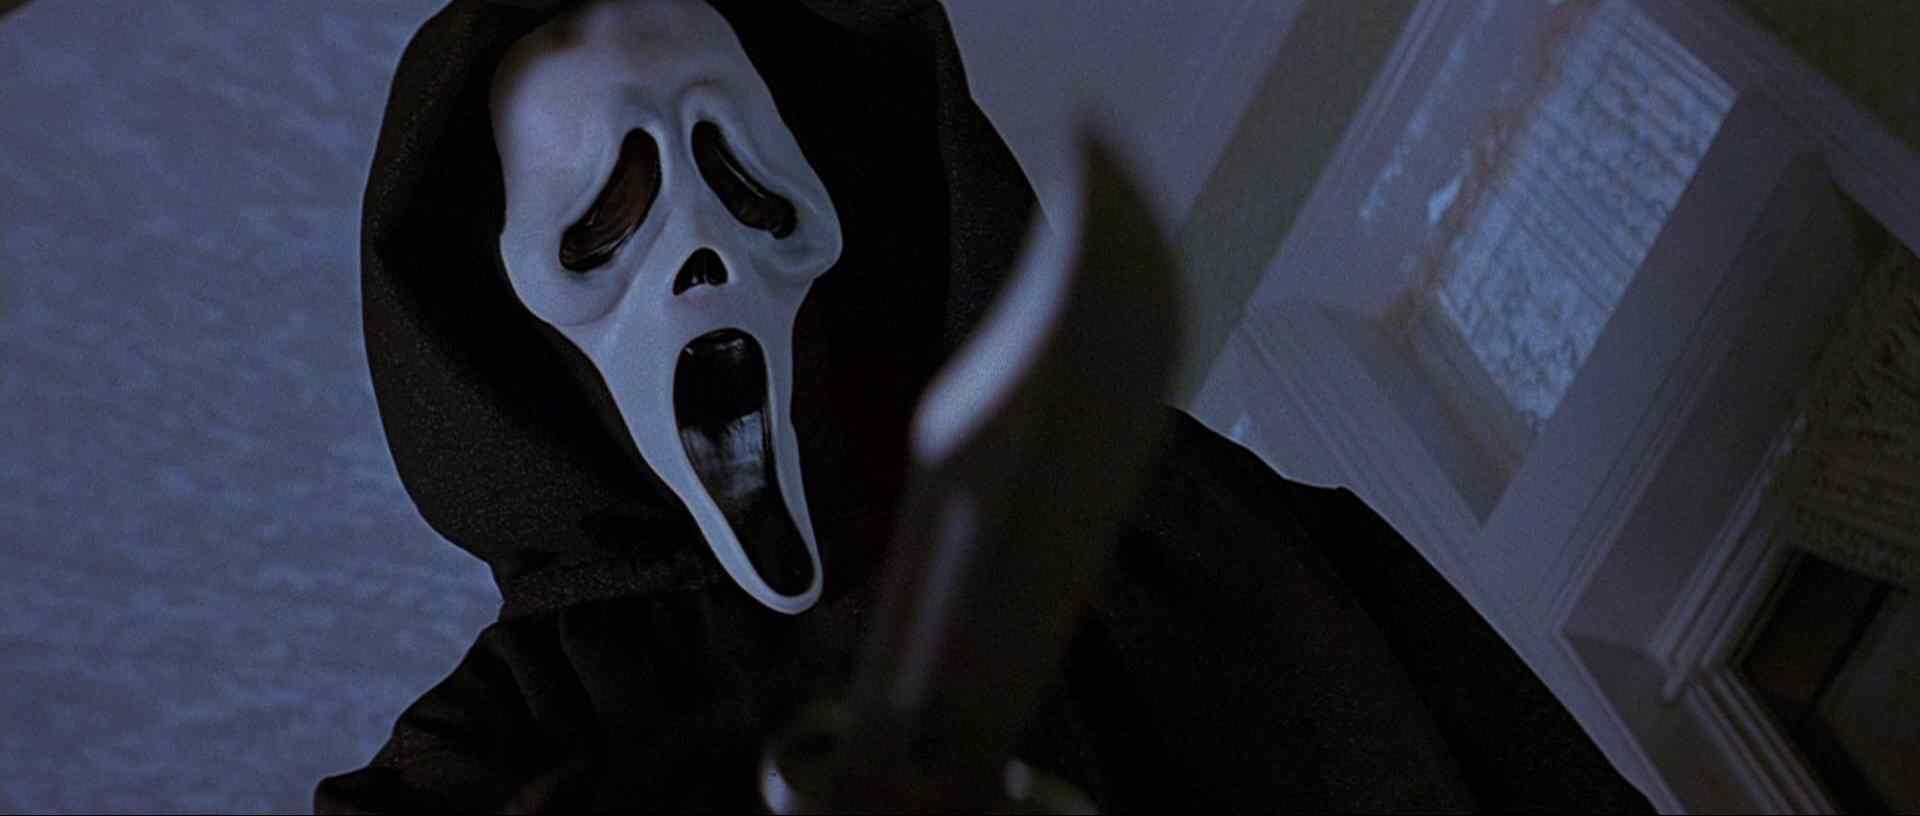 The famous ghostface killer in the scream movie franchise.